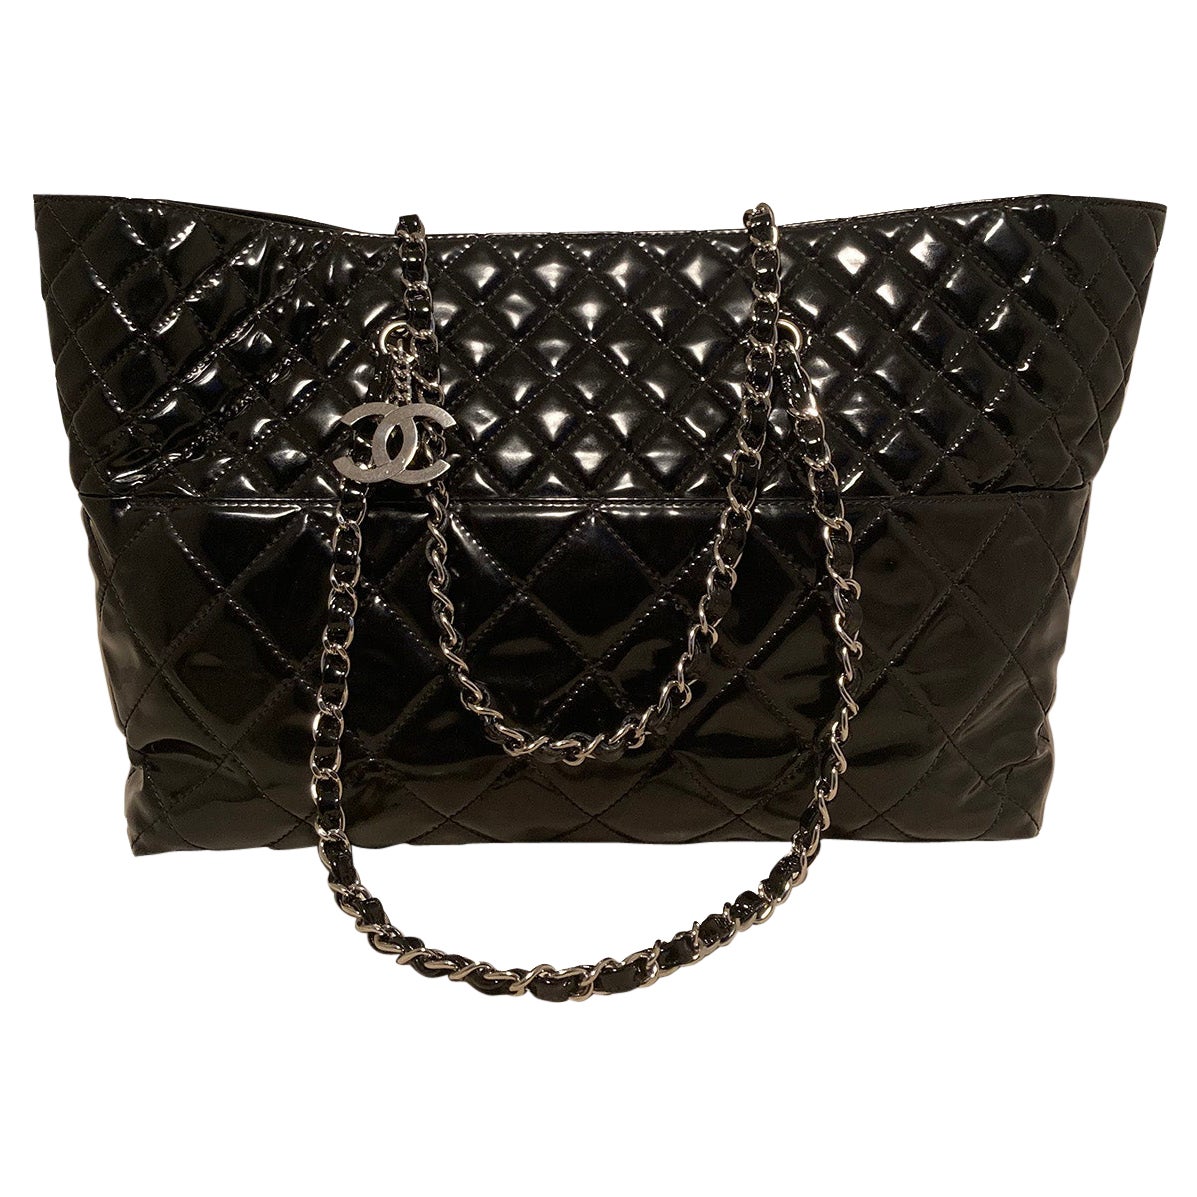 Chanel Black Patent in The Business Tote